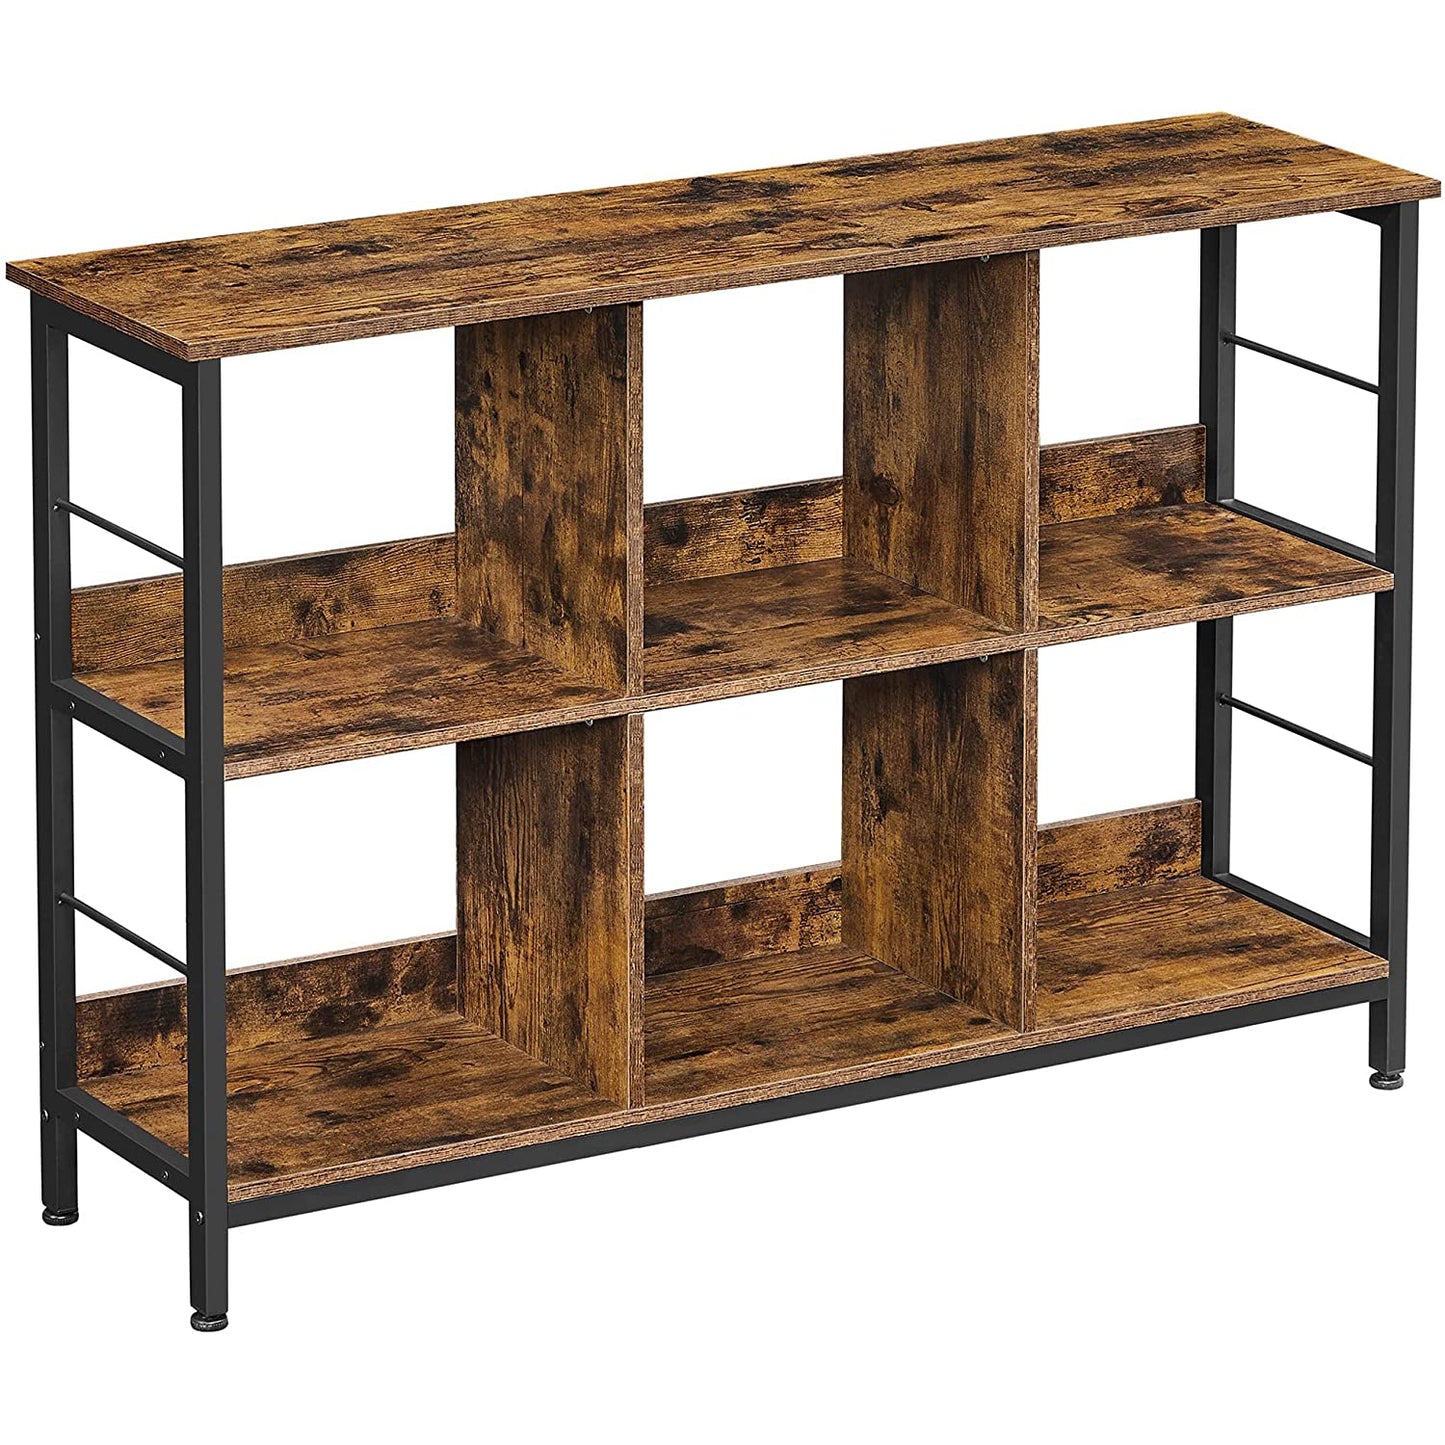 Nancy's Canfield Bookcase - Shelving unit - Storage cabinet - Brown - Black - Processed Wood - Metal - 120 x 33 x 80 cm